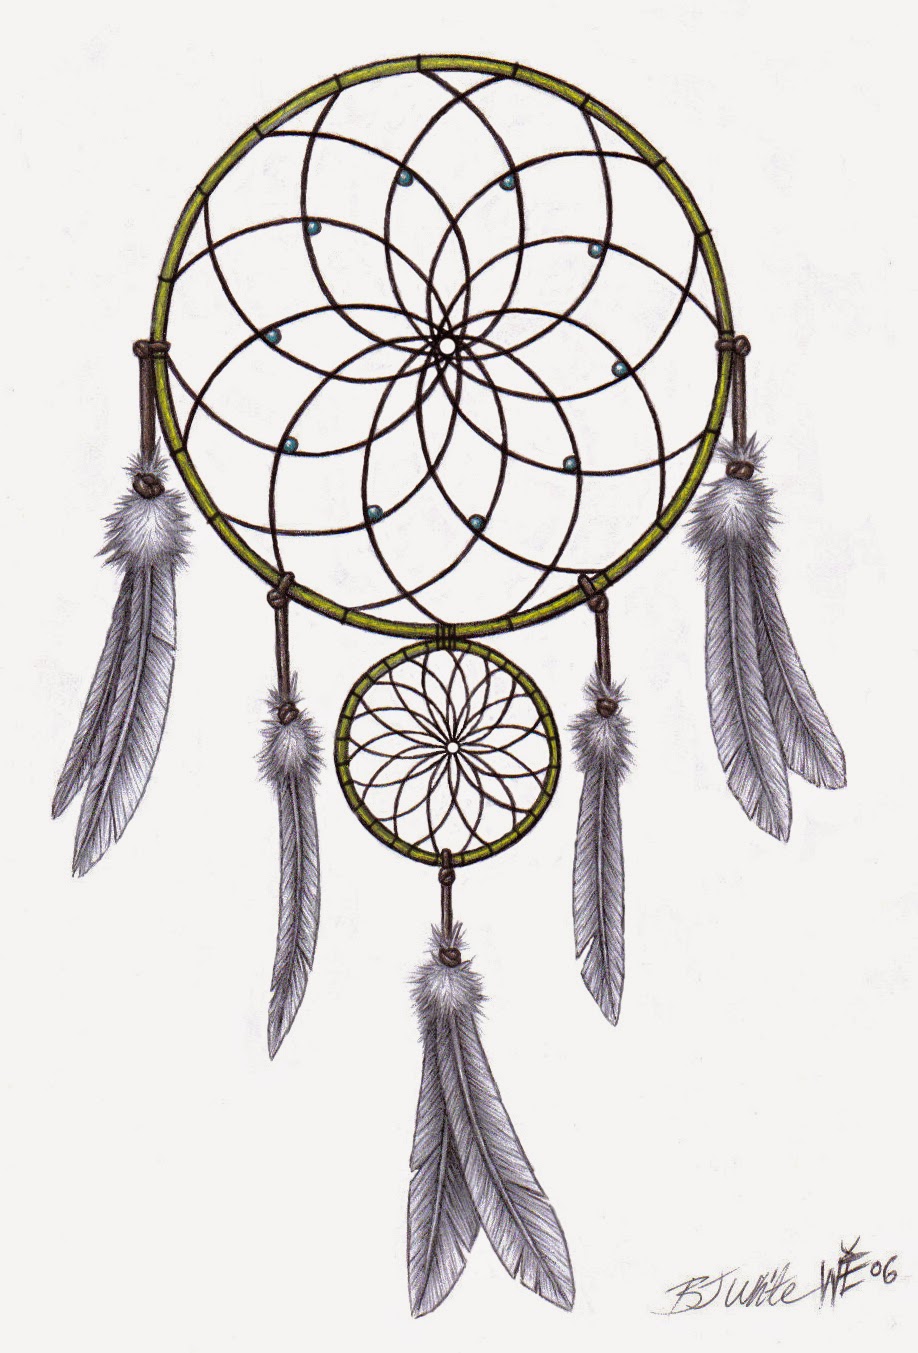 Dreamcatcher Most Beautiful Image In The Film Heirs Cute